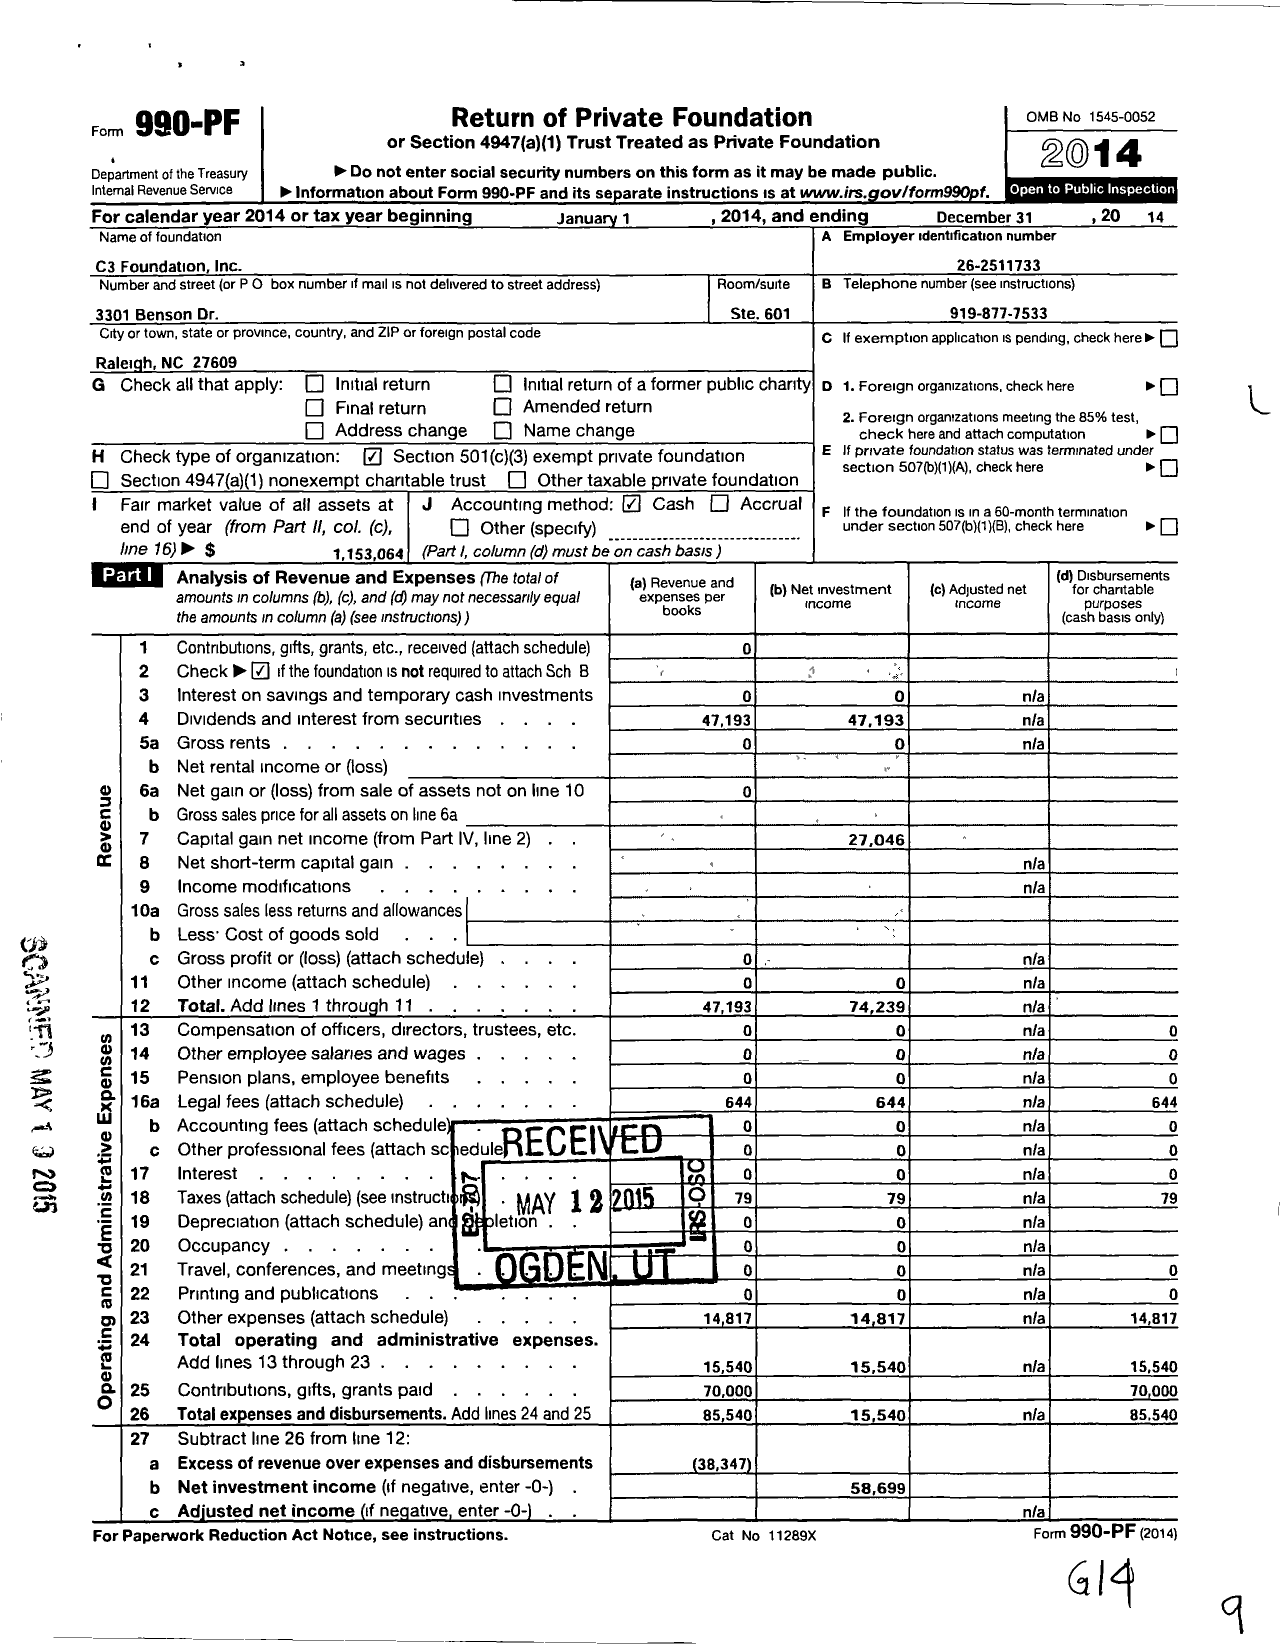 Image of first page of 2014 Form 990PF for C3 Foundation